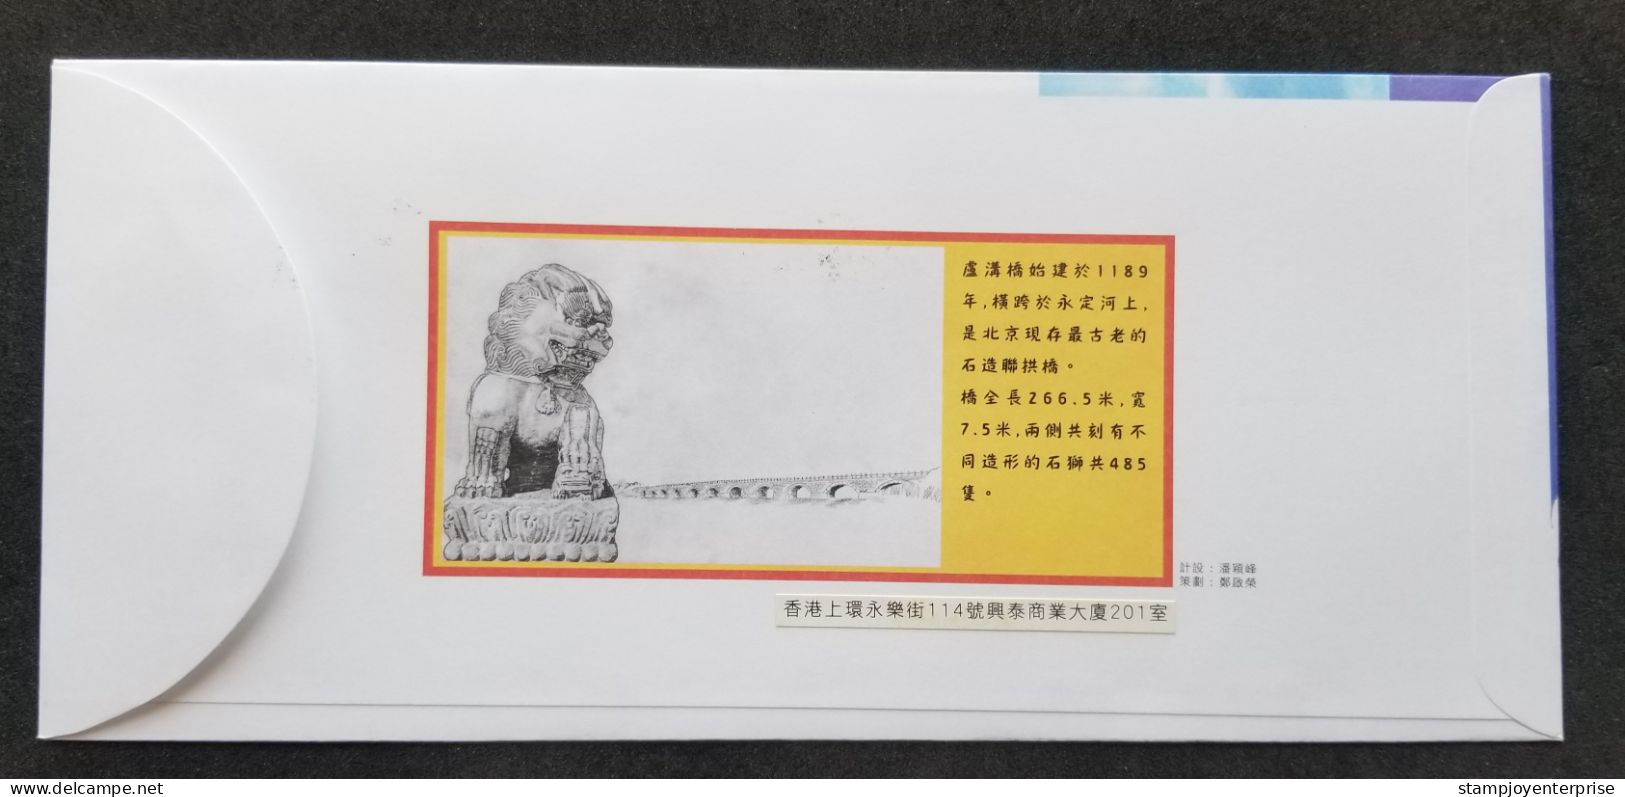 Hong Kong 70th Anniversary Marco Polo Bridge Incident 1937 - 2007 War Lion Stone (FDC) *rare - Lettres & Documents